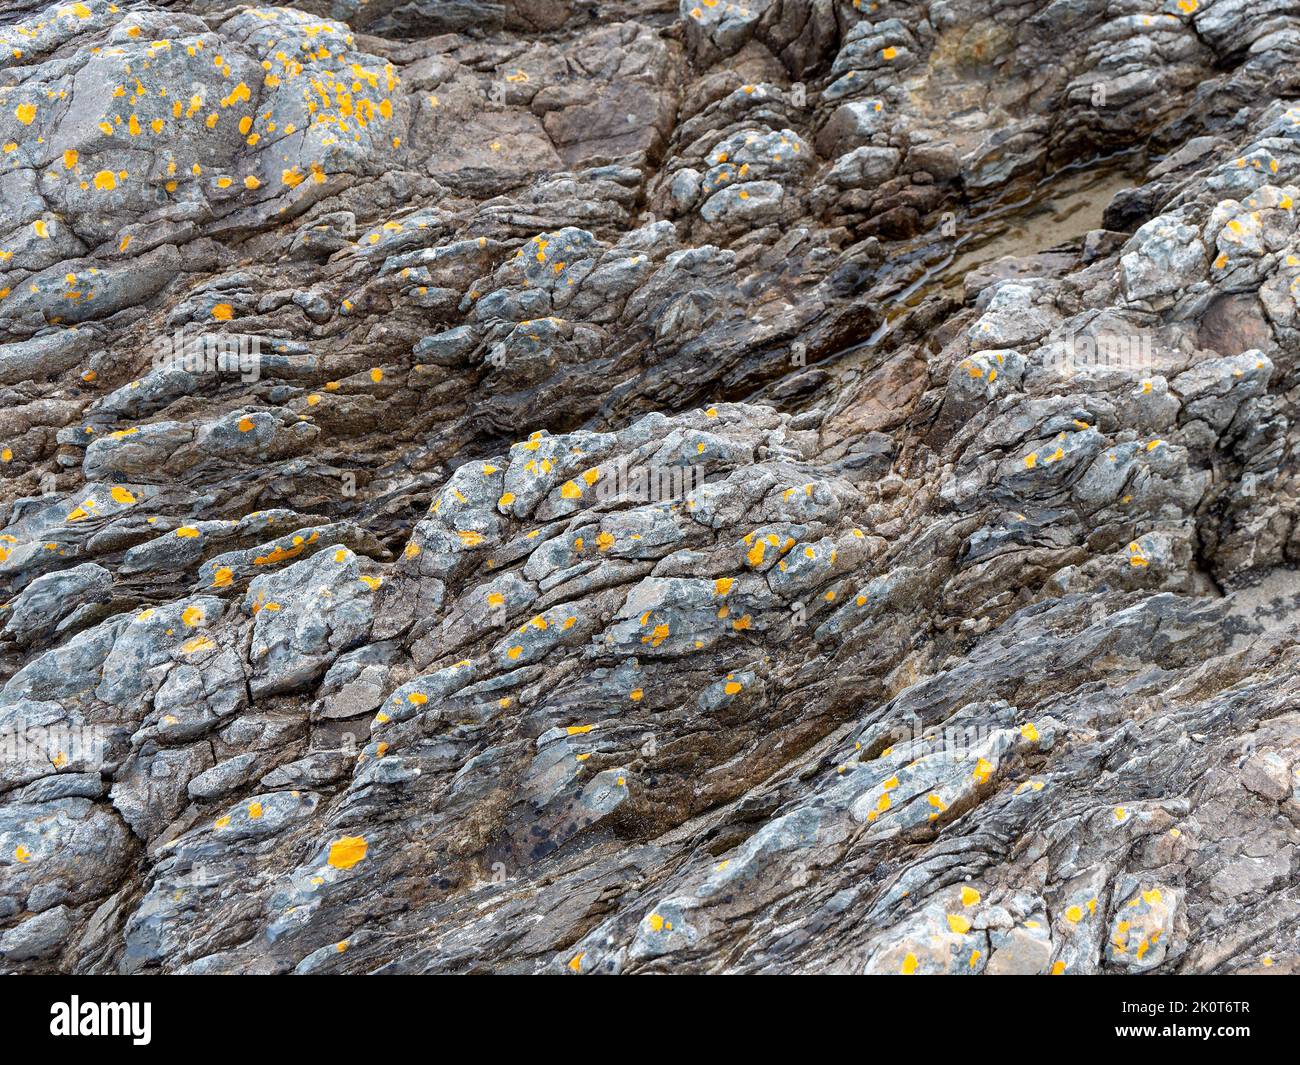 Beautiful rock. Stone close-up, full frame. Stone texture, rock formation. Stock Photo